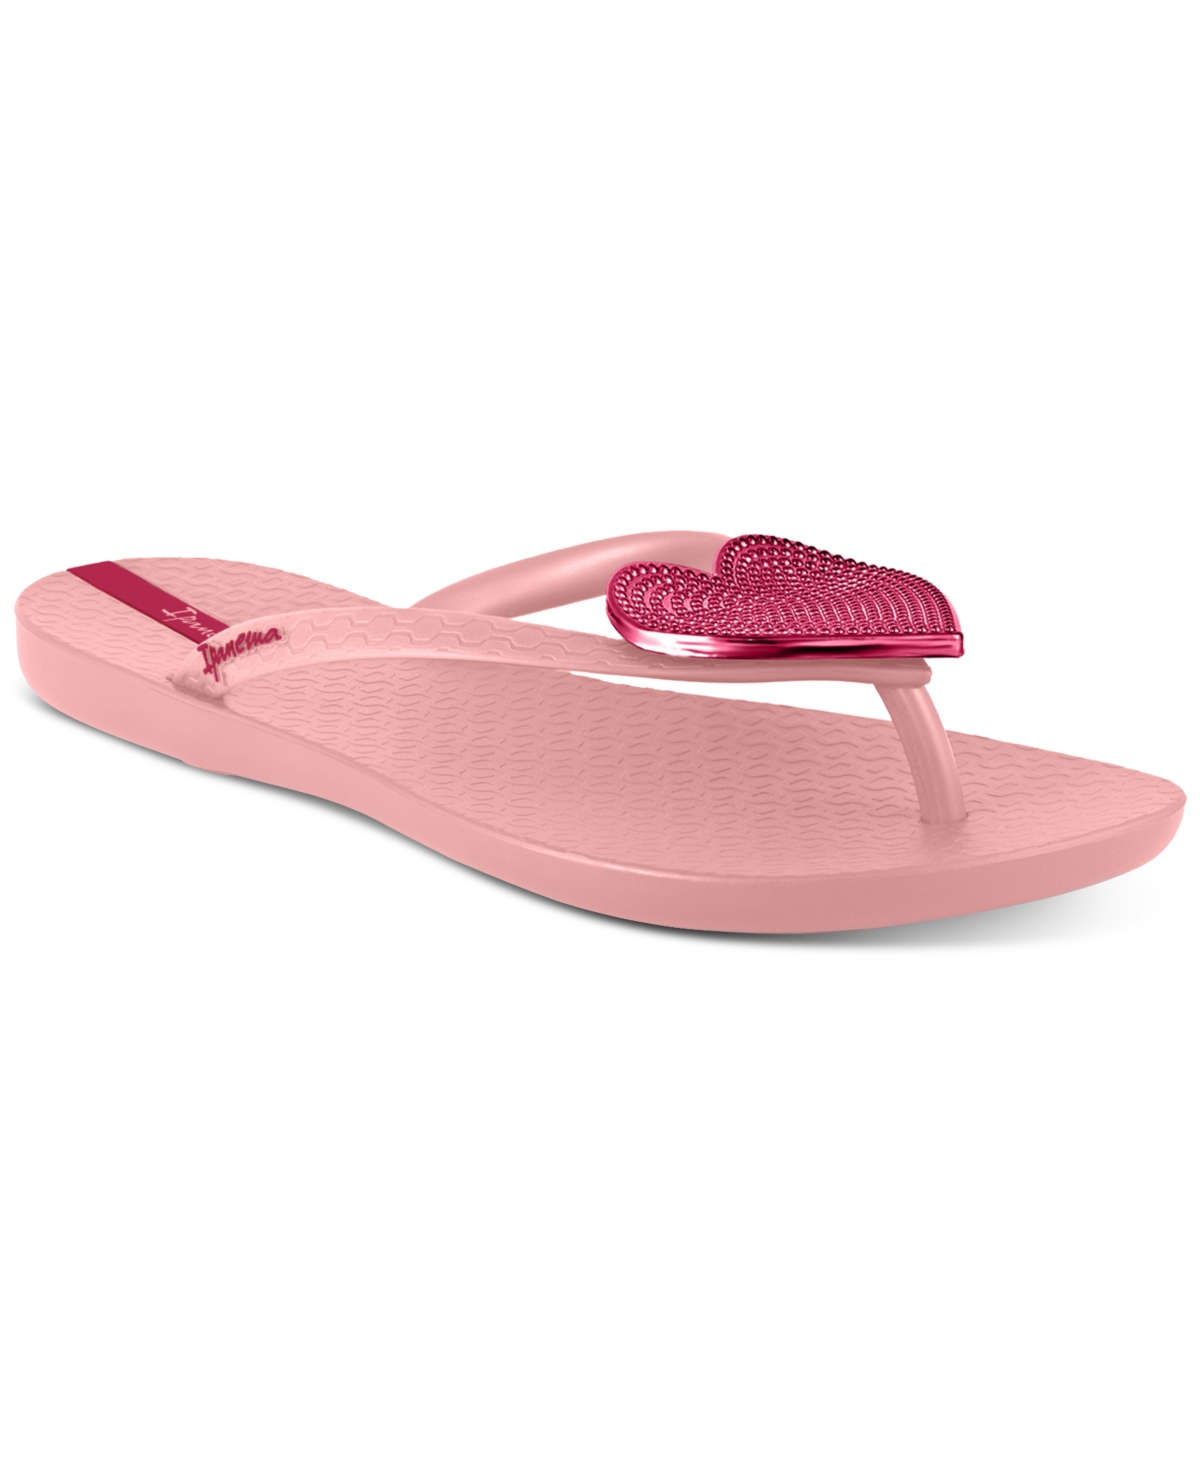 Ipanema Women's Wave Heart Sparkle Flip-flop Sandals Women's Shoes In Pink/red